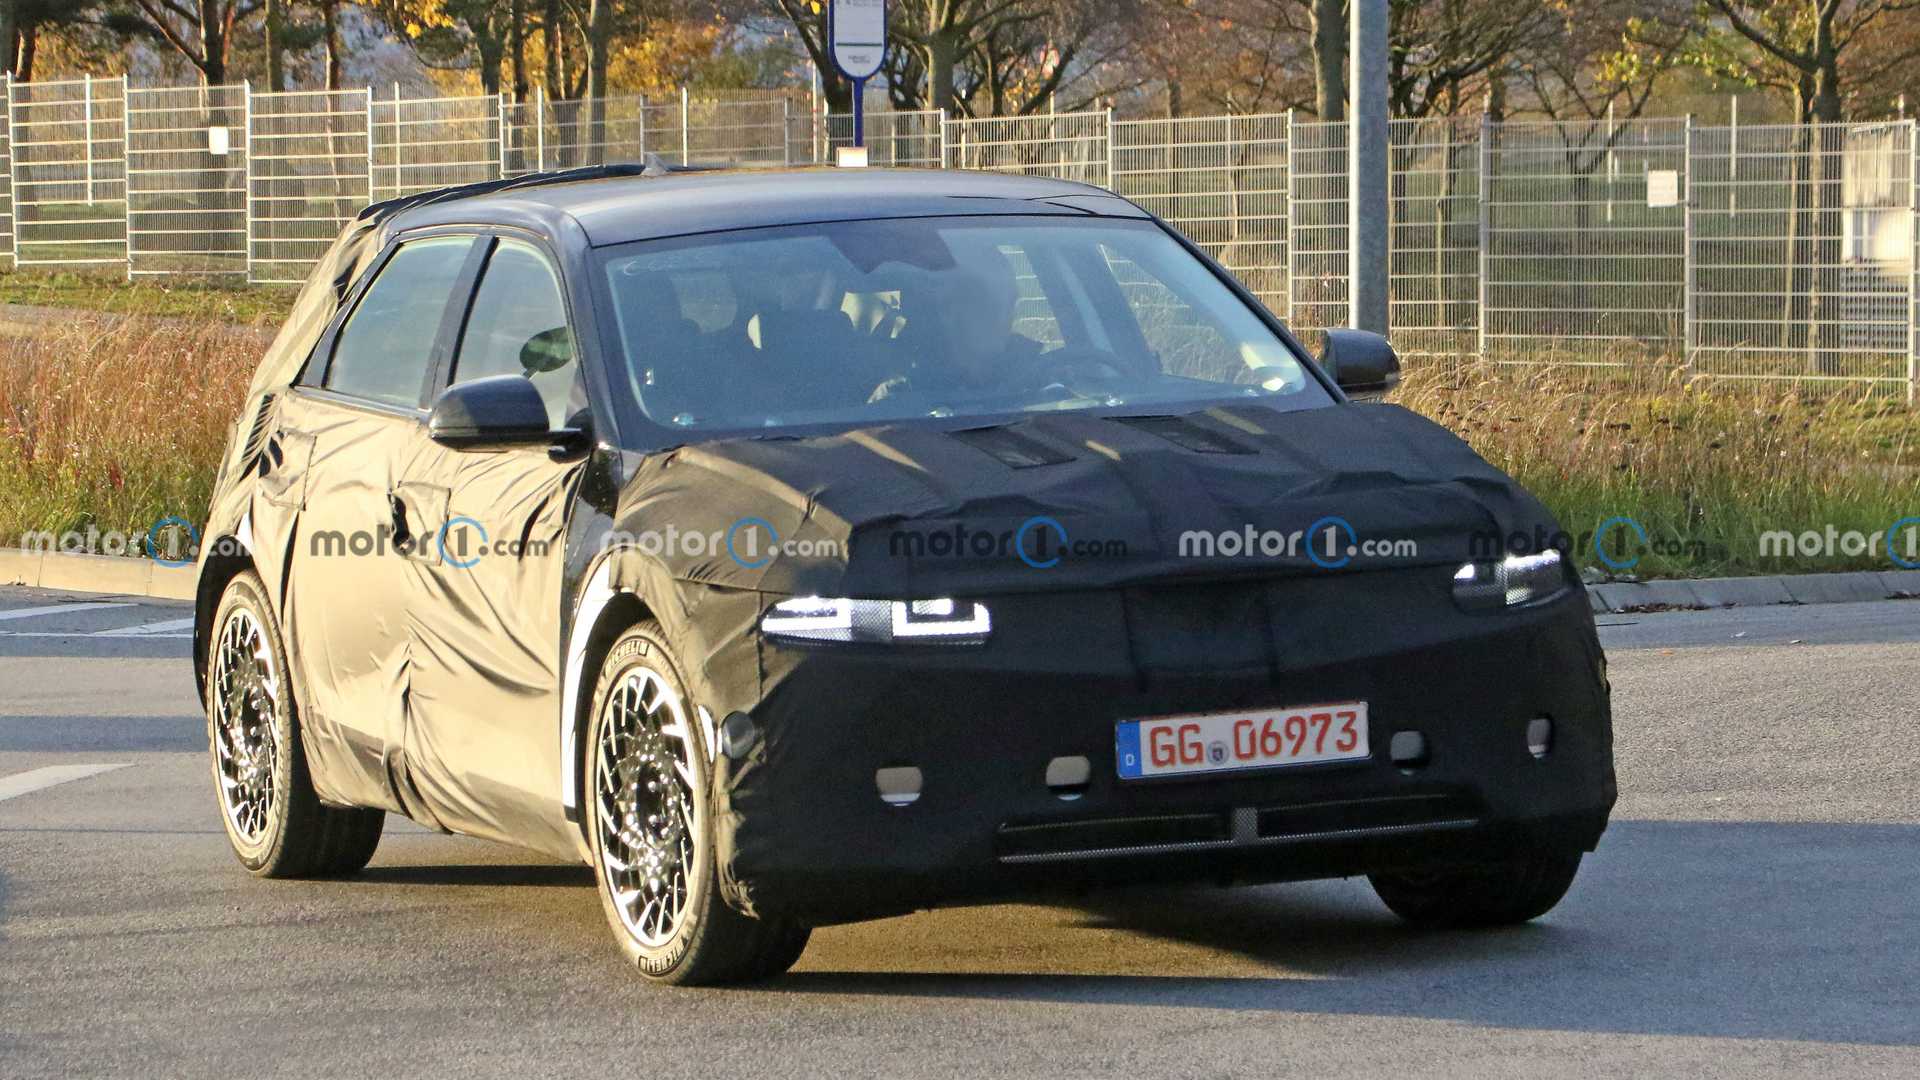 2022 Hyundai Ioniq 5 Spied With Production Body And Lights